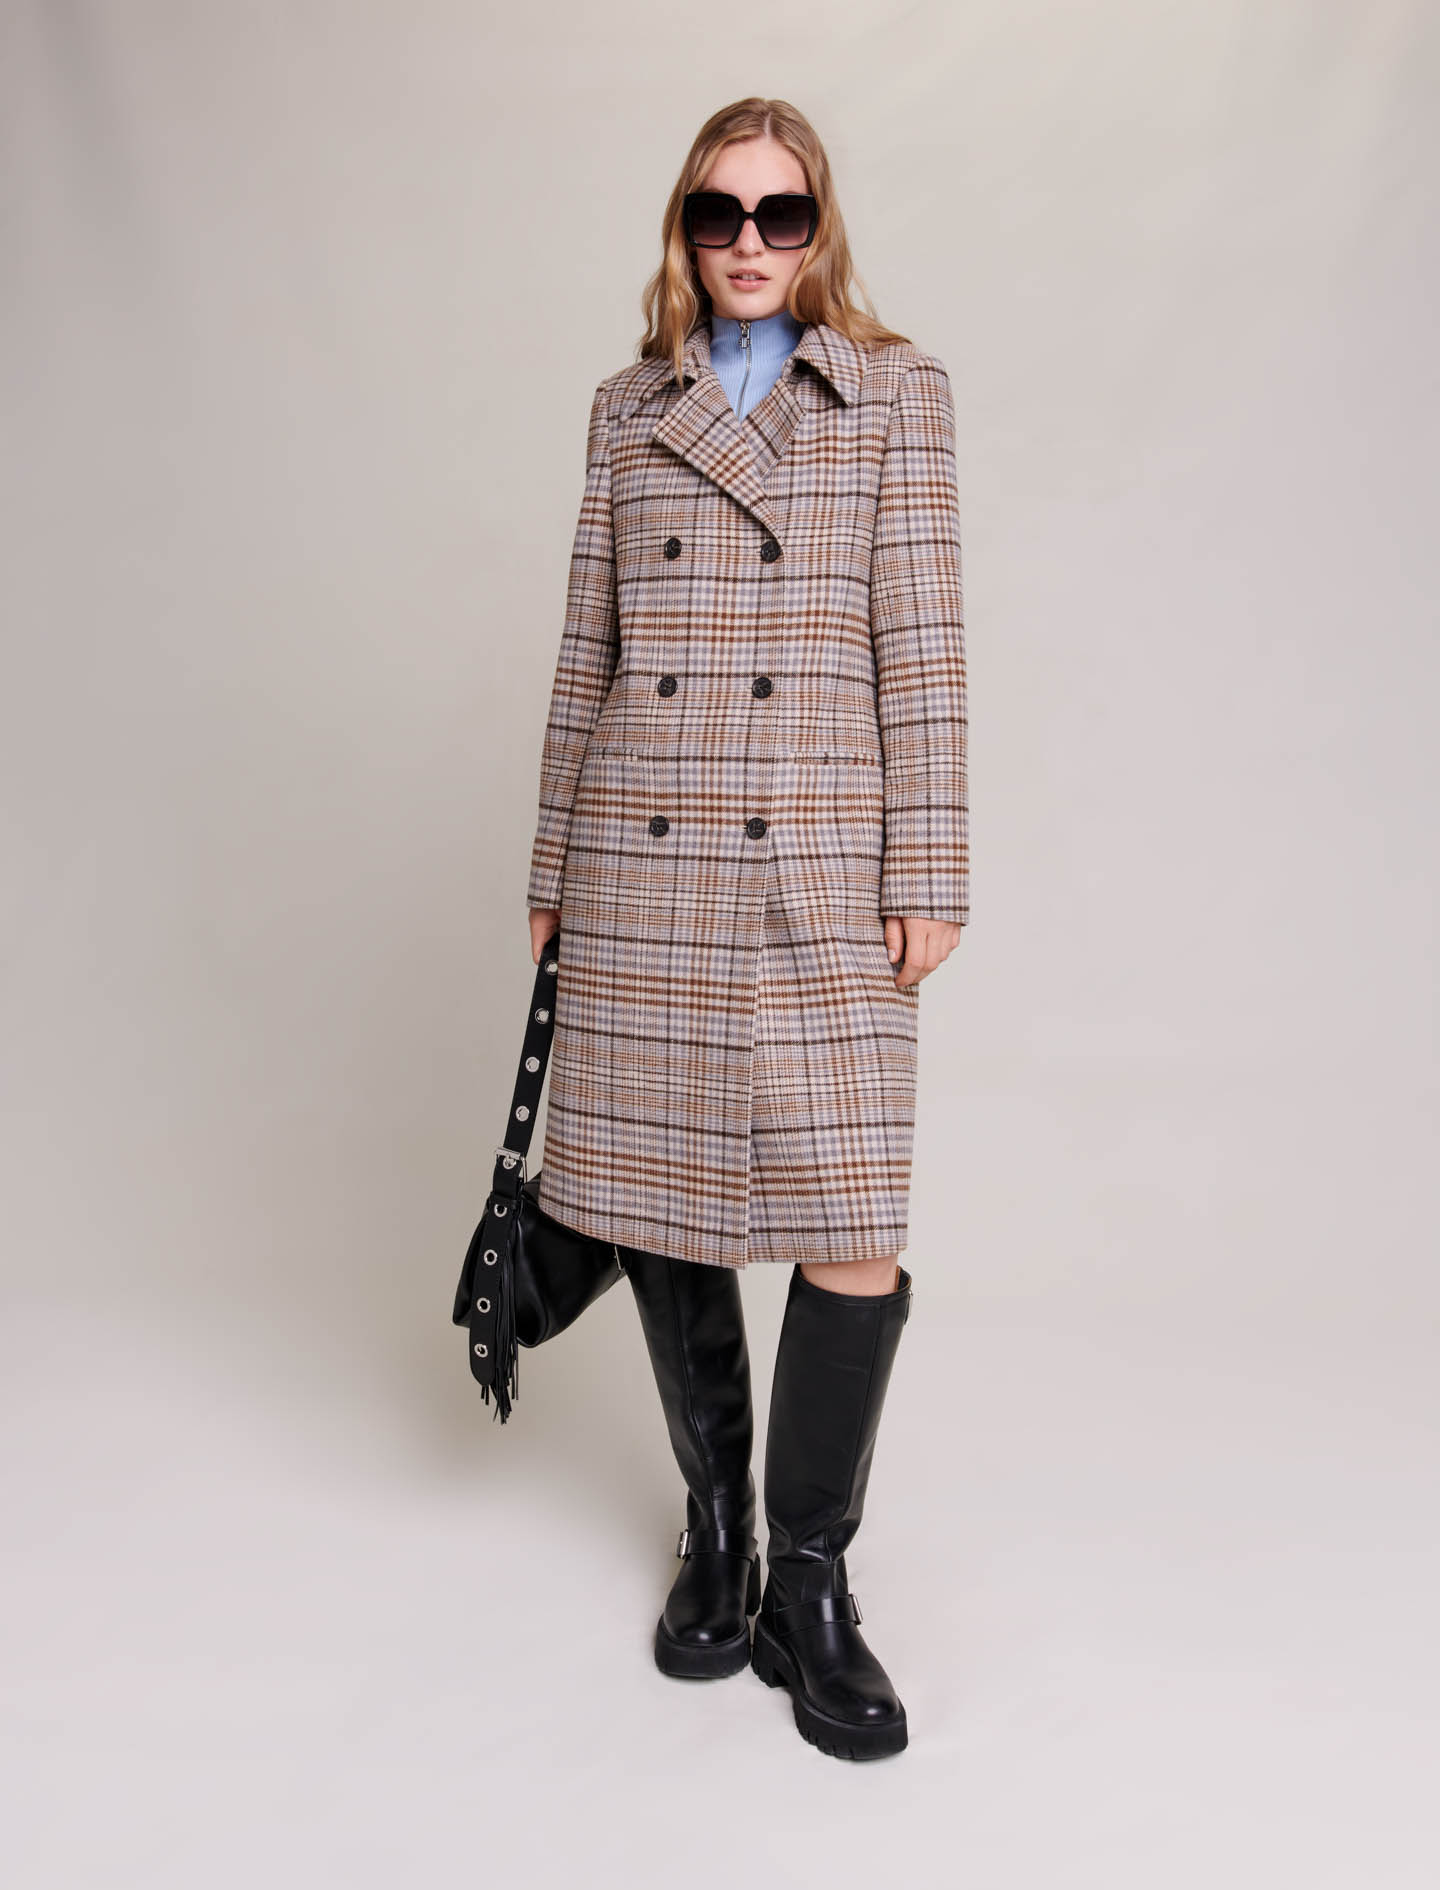 Maje Woman's polyester Lining: Long checked coat for Fall/Winter, in color Beige / Beige